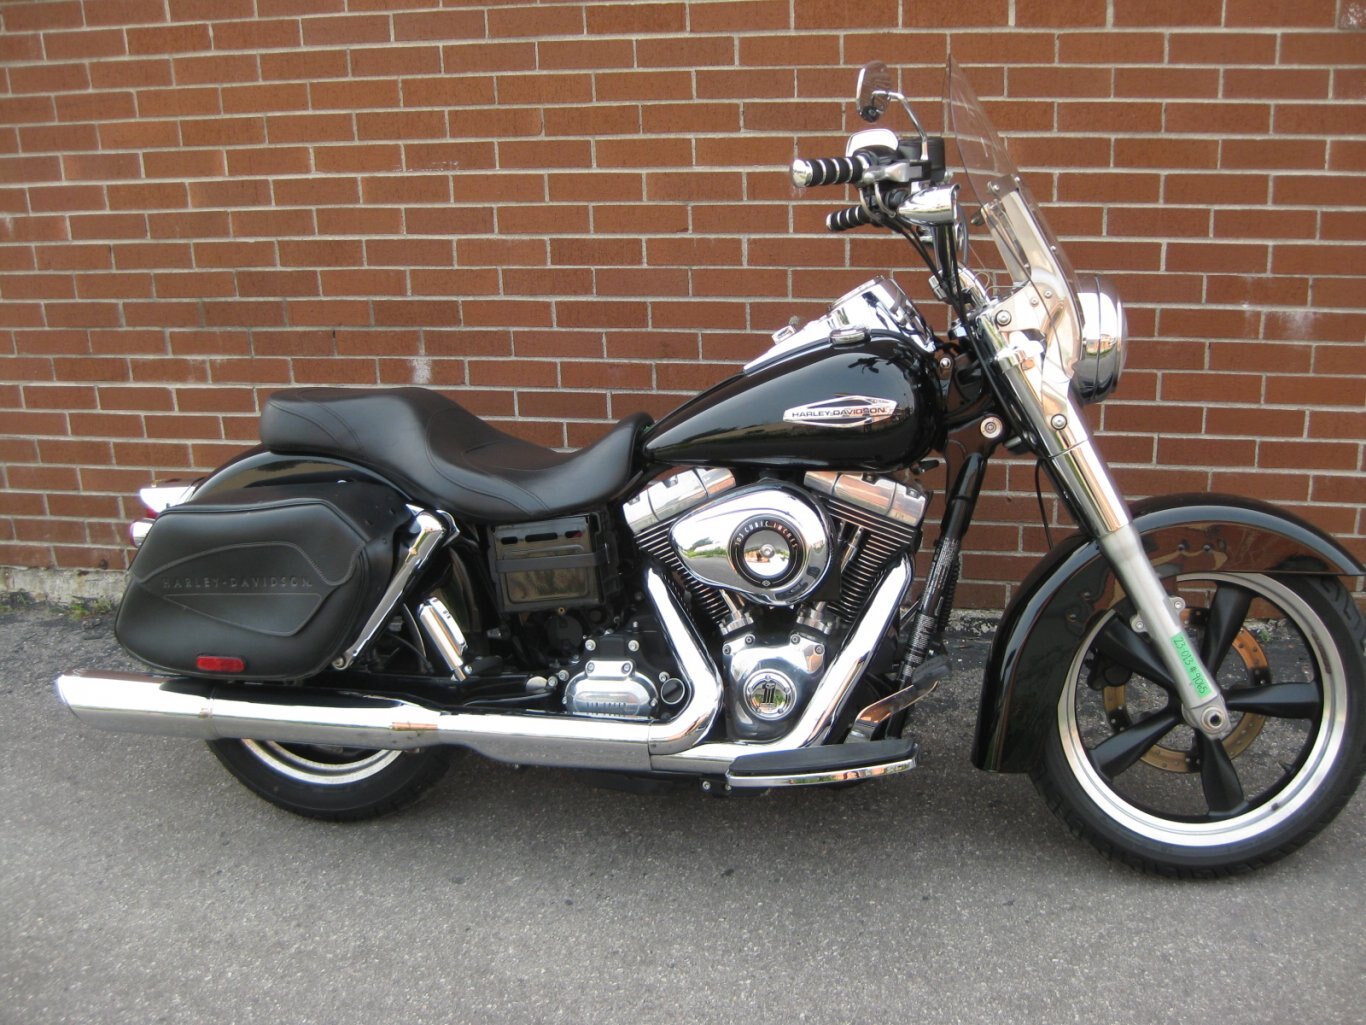 2013 FLD Dyna Switchback - SOLD AND CONGRATULATIONS TO LADY  IRENE & SIR CHARLES!! WELCOME TO THE COMMUNITY OF HARLEY DAVIDSON FAMILY TOURING , “RIDIN” THE HIGHWAY TO THE FREEDOM ZONE – WITH THANKS FROM GARY & TEAM CYCLE WORLD!!!!